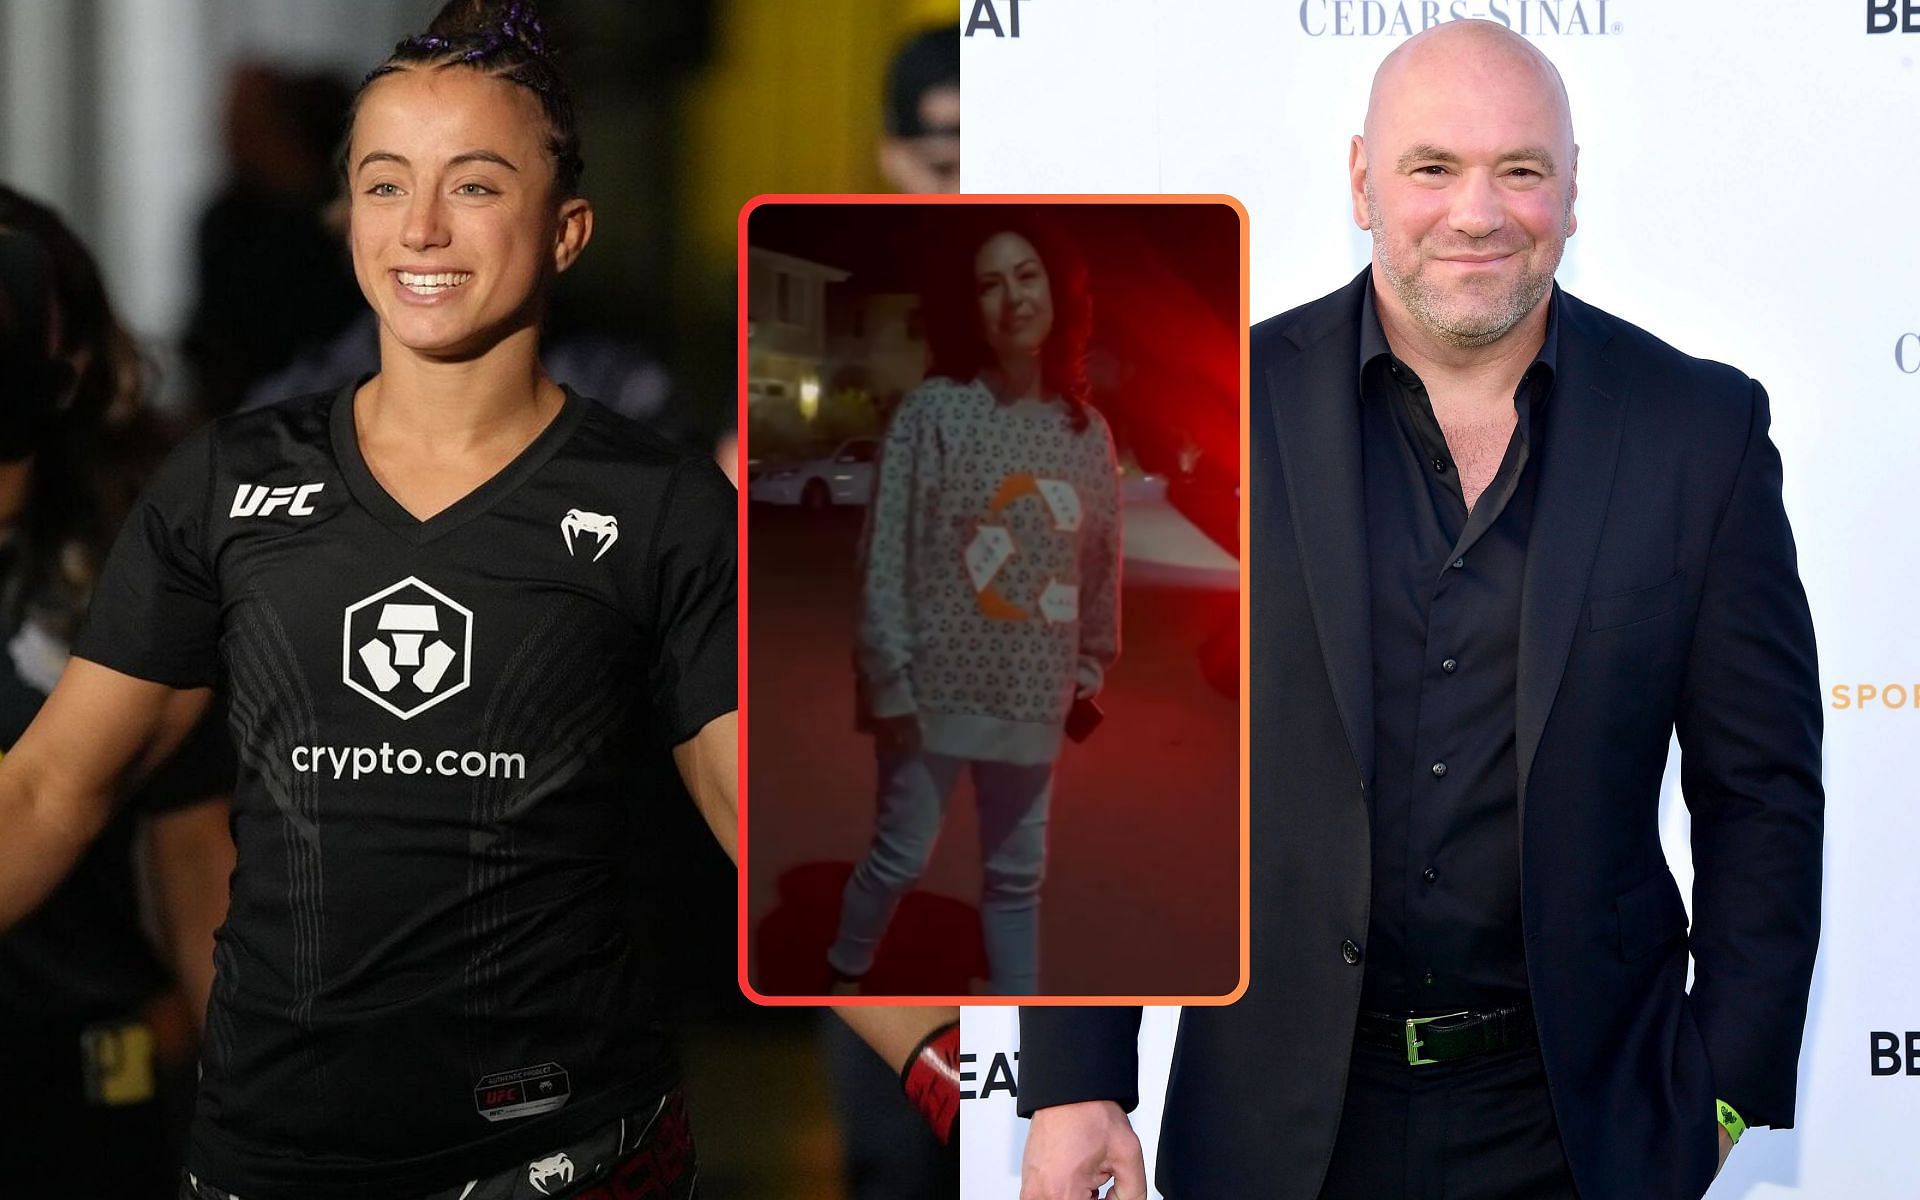 Maycee Barber texted Dana White amid parking lot altercation with a drunk lady